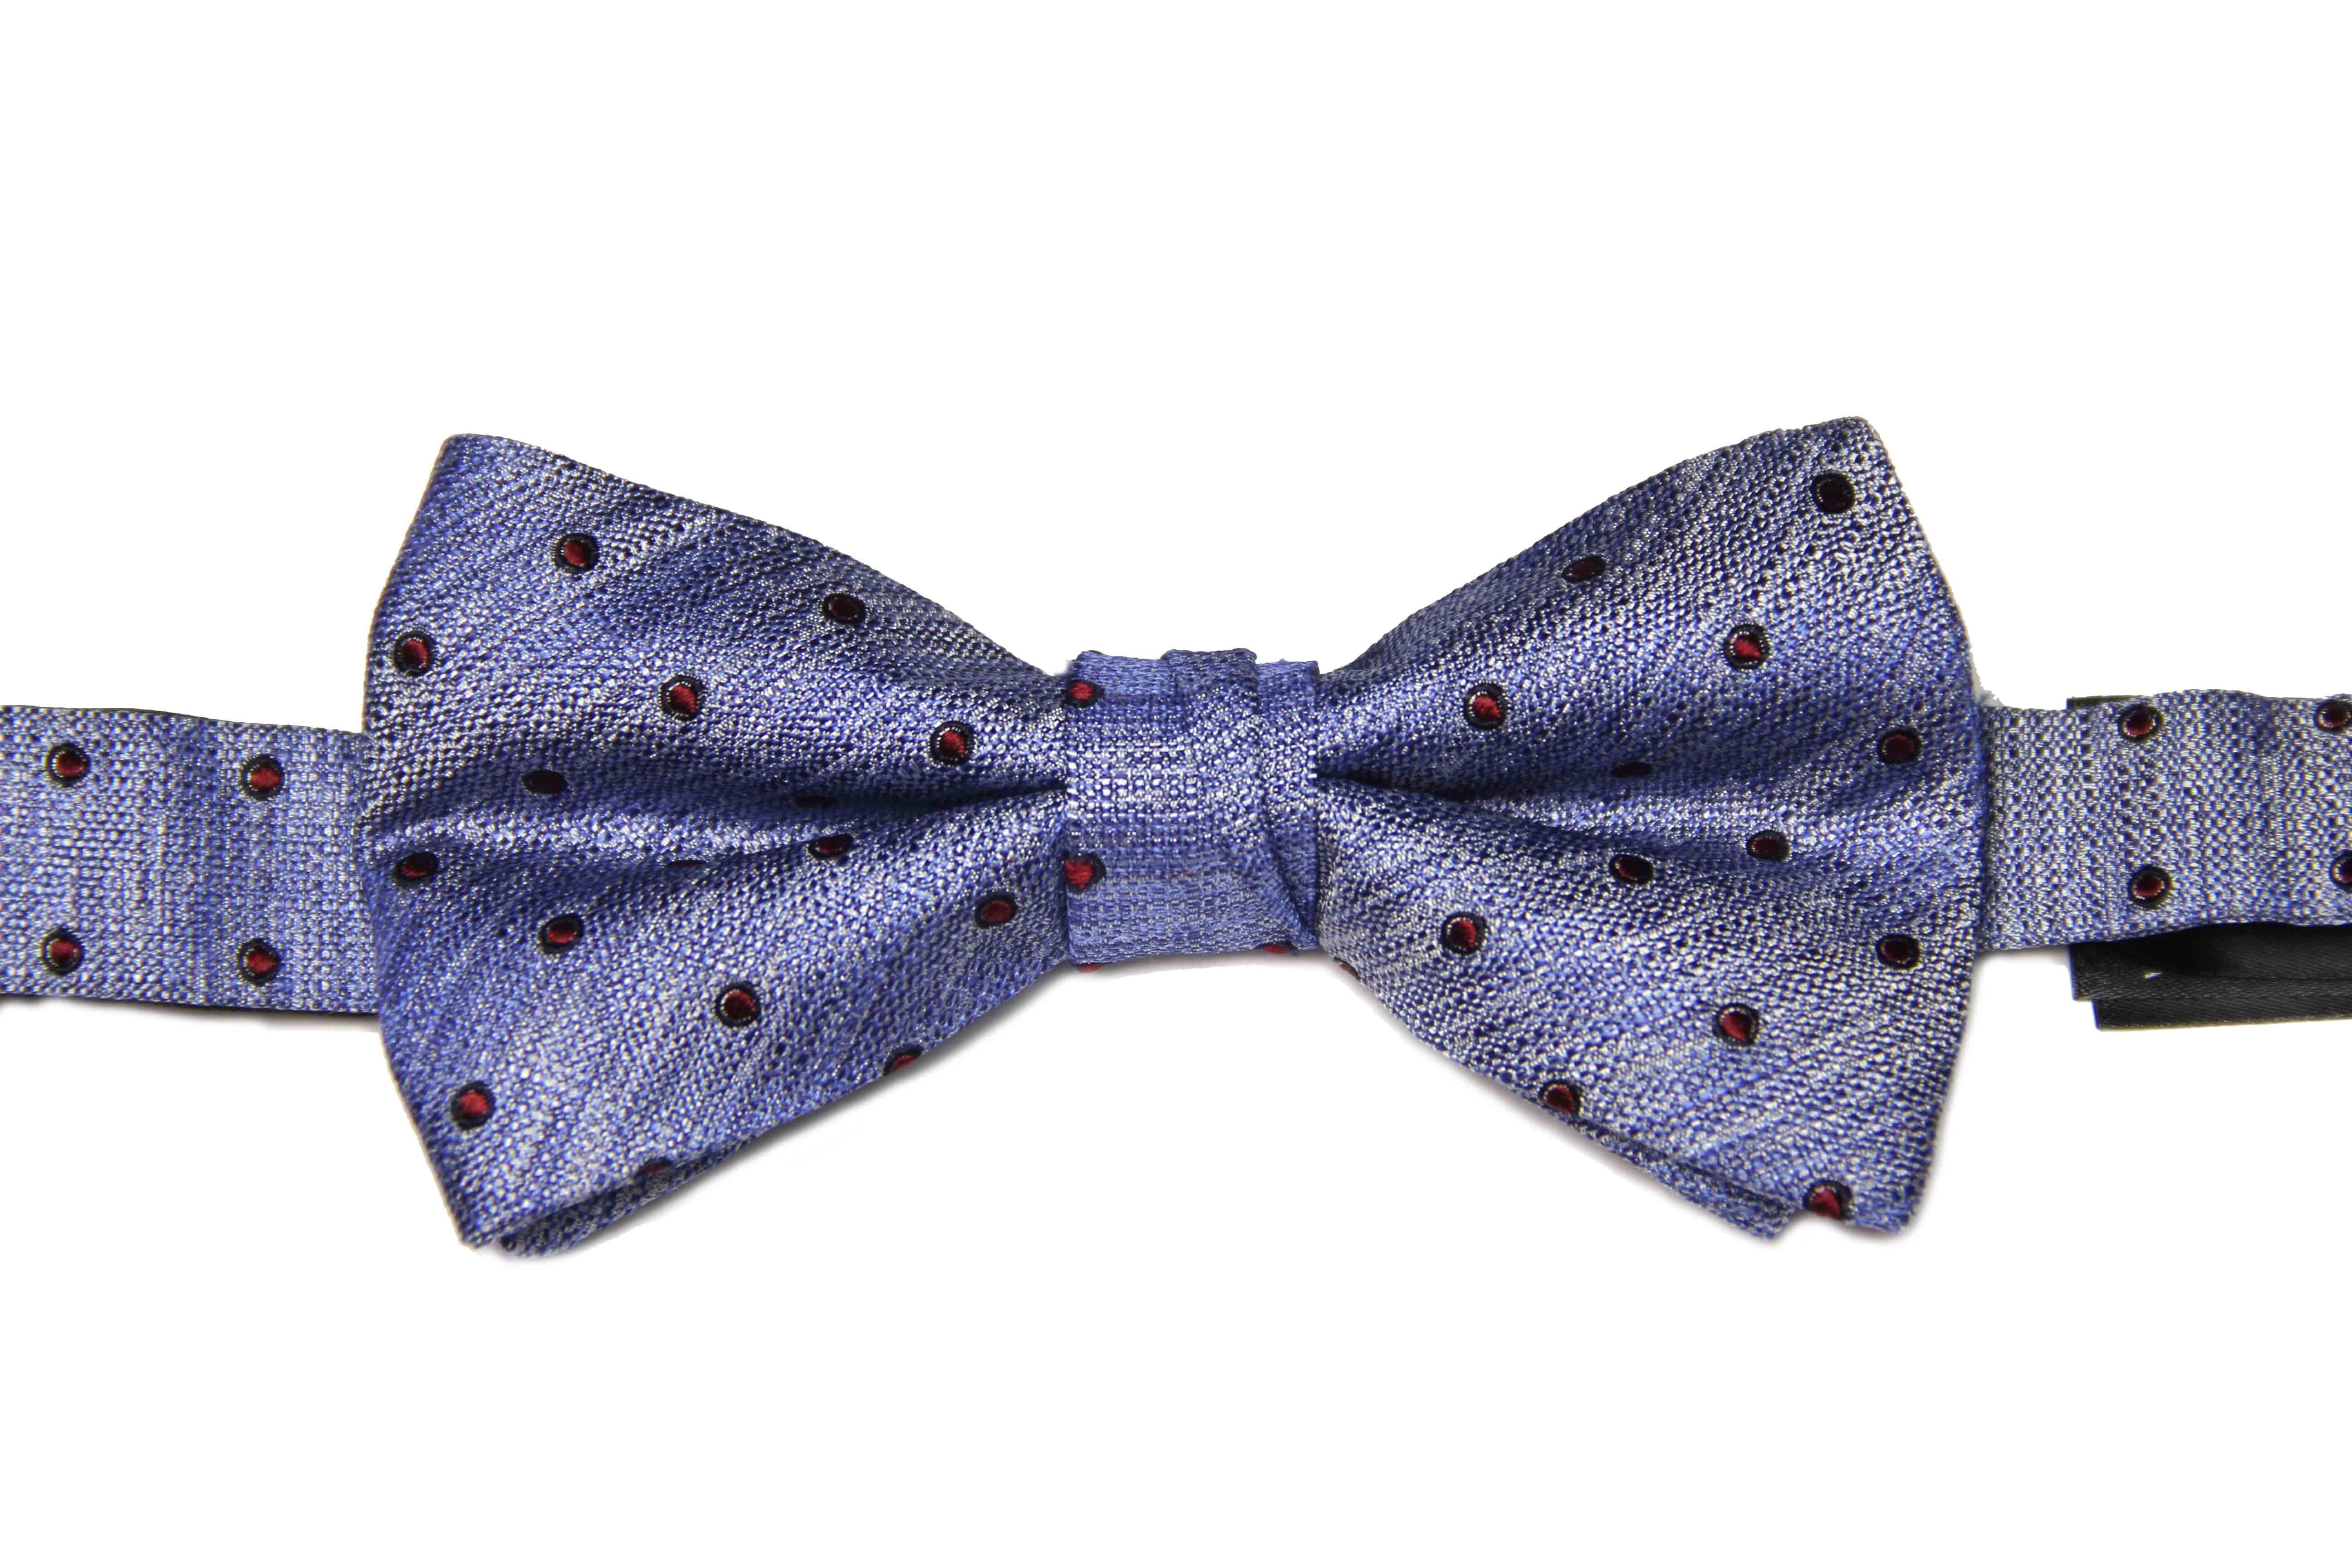 Ted Baker Mulberry Silk Bow Tie Blue Red Polka Dot Pre-Tied Men's